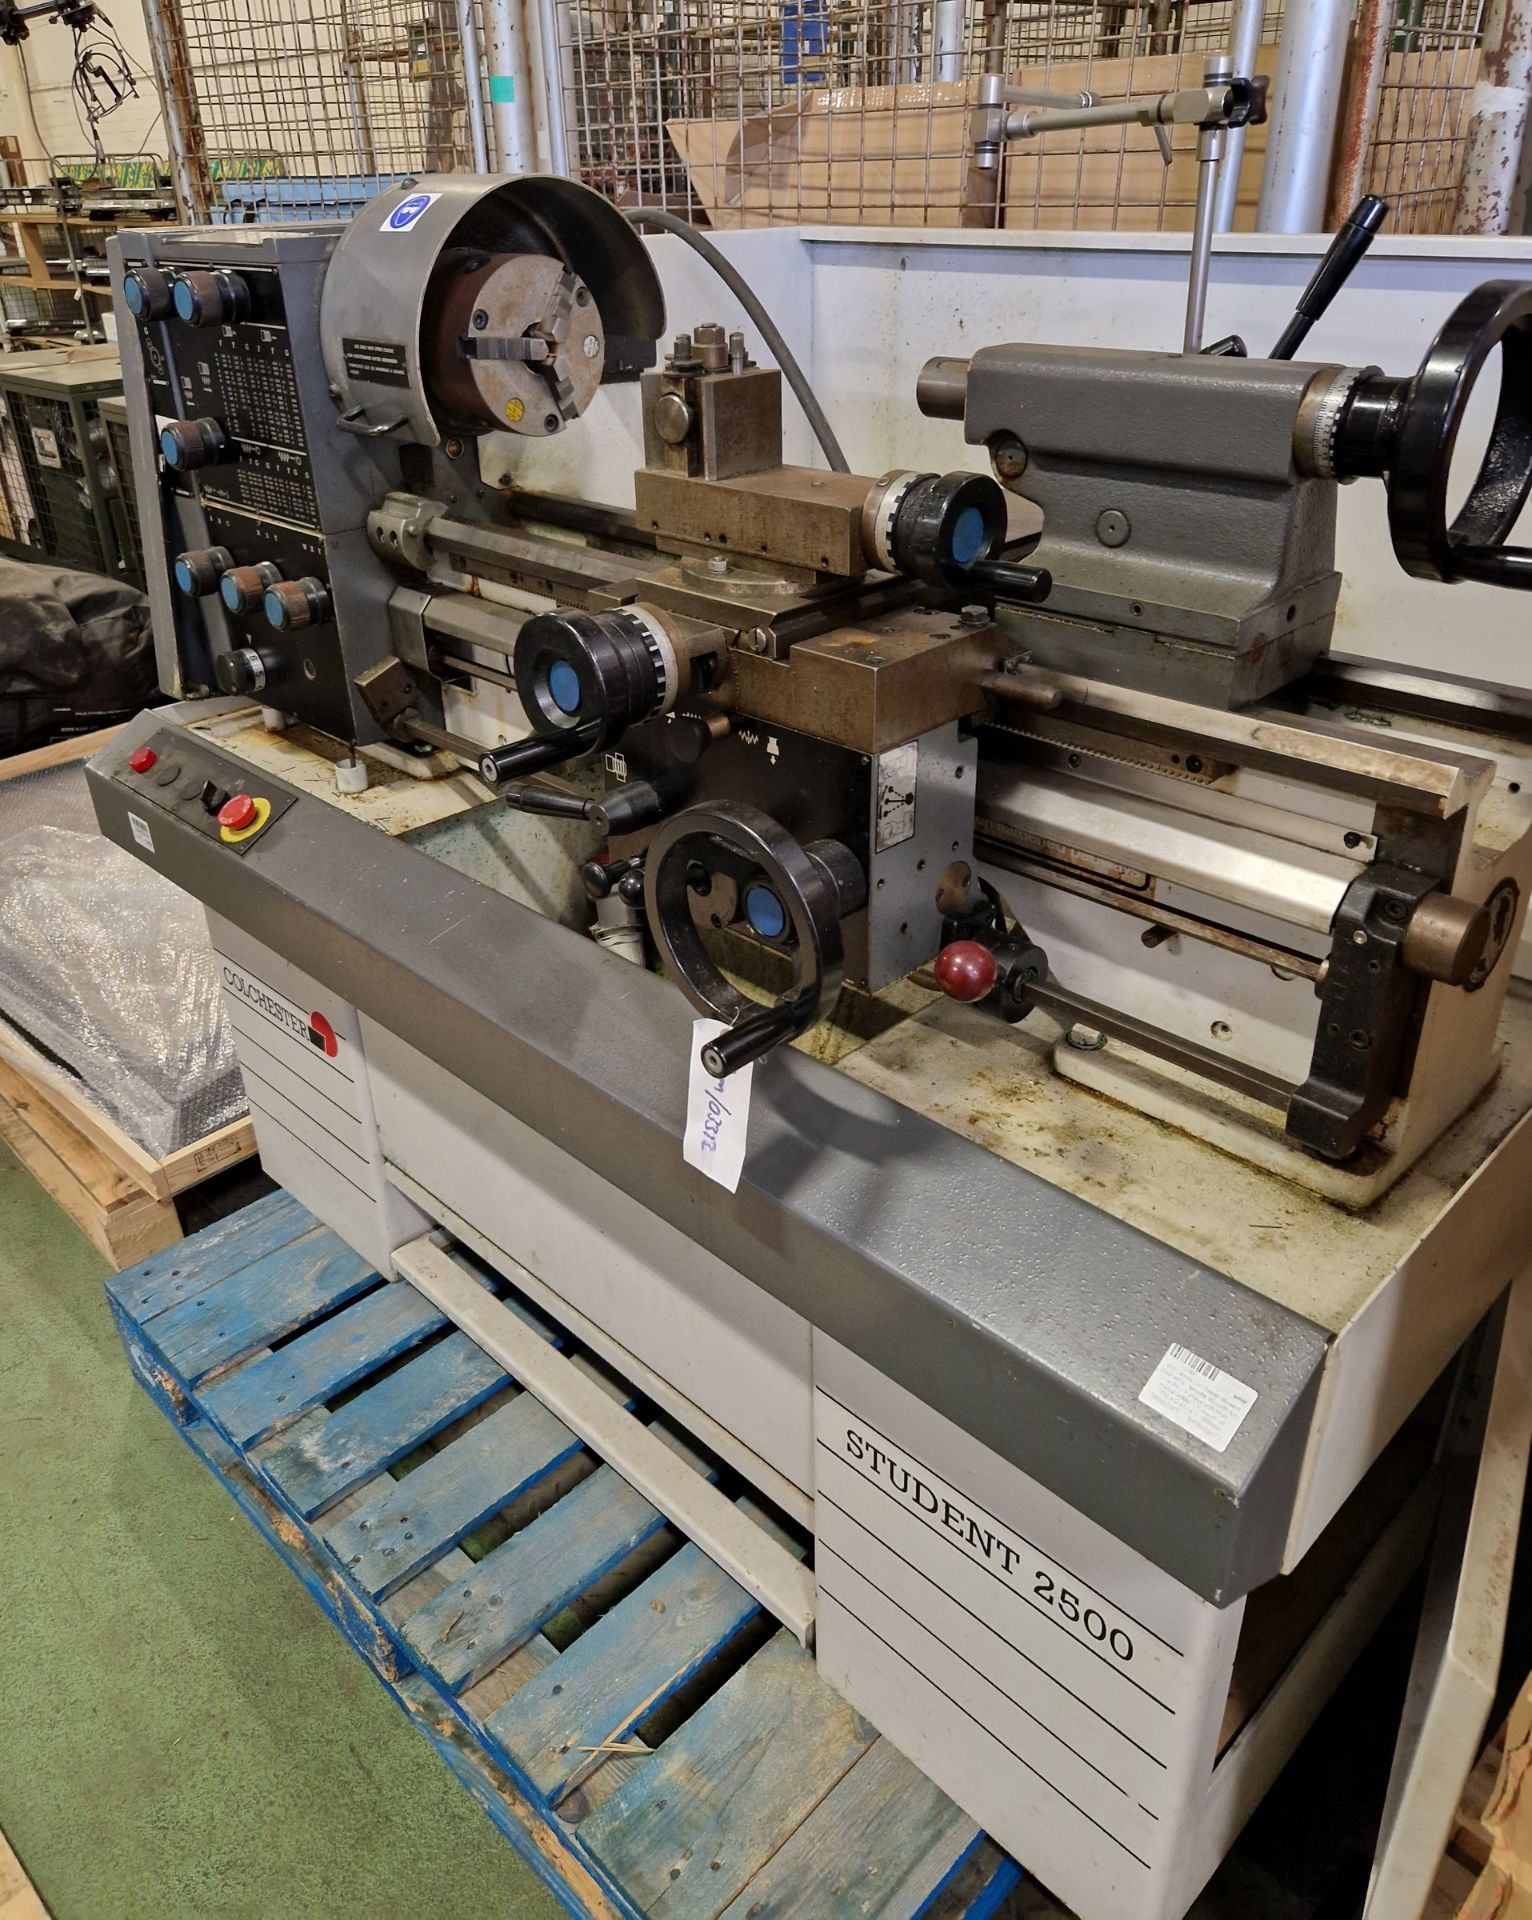 600 Lathes Colchester Student 2500 lathe - spindle 40-2500 rpm - 415V - 3 phase - Image 3 of 12